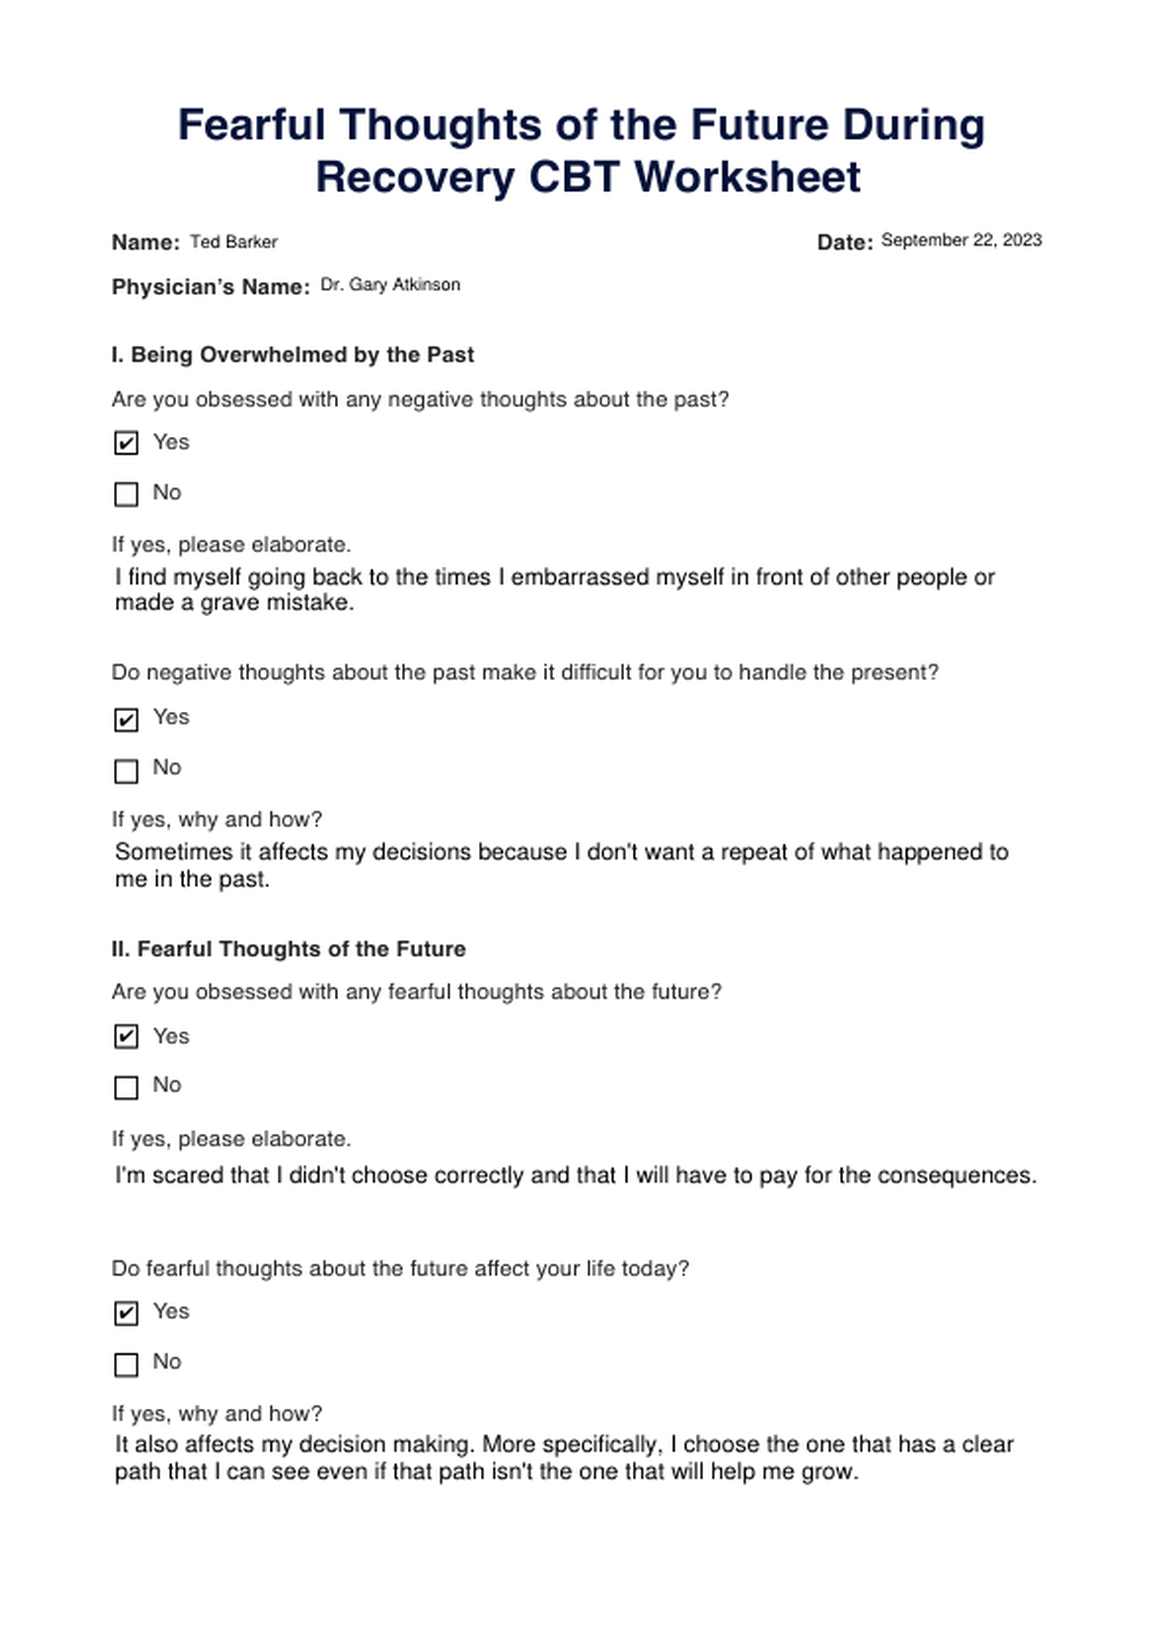 Fearful Thoughts of the Future During Recovery CBT Worksheet PDF Example